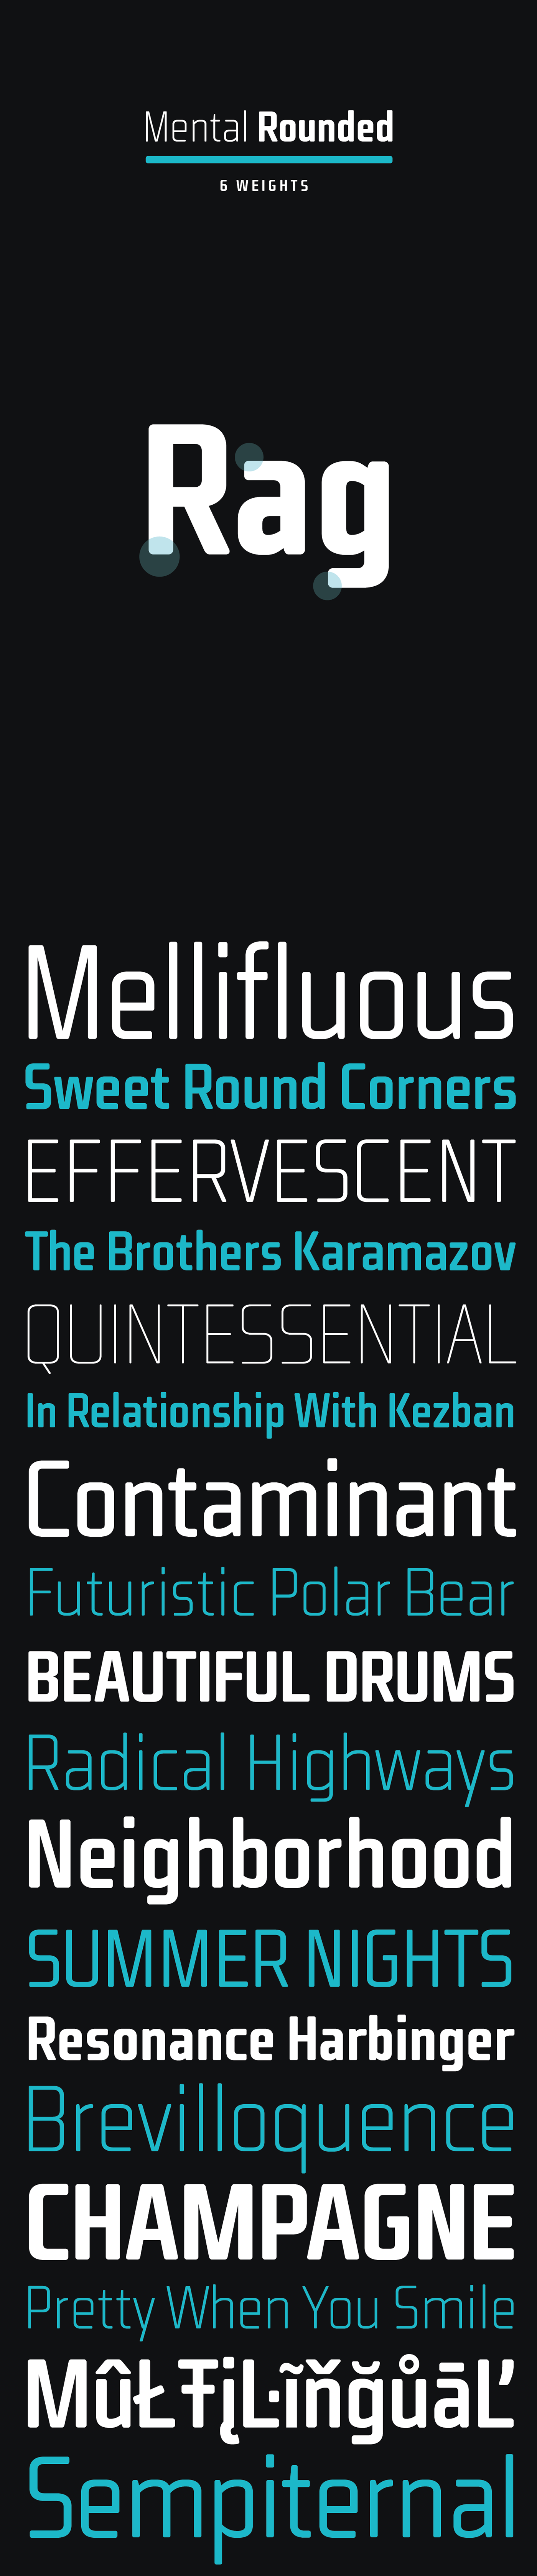 rounded type font Mental Rounded Display Typeface Round Corner type family mental